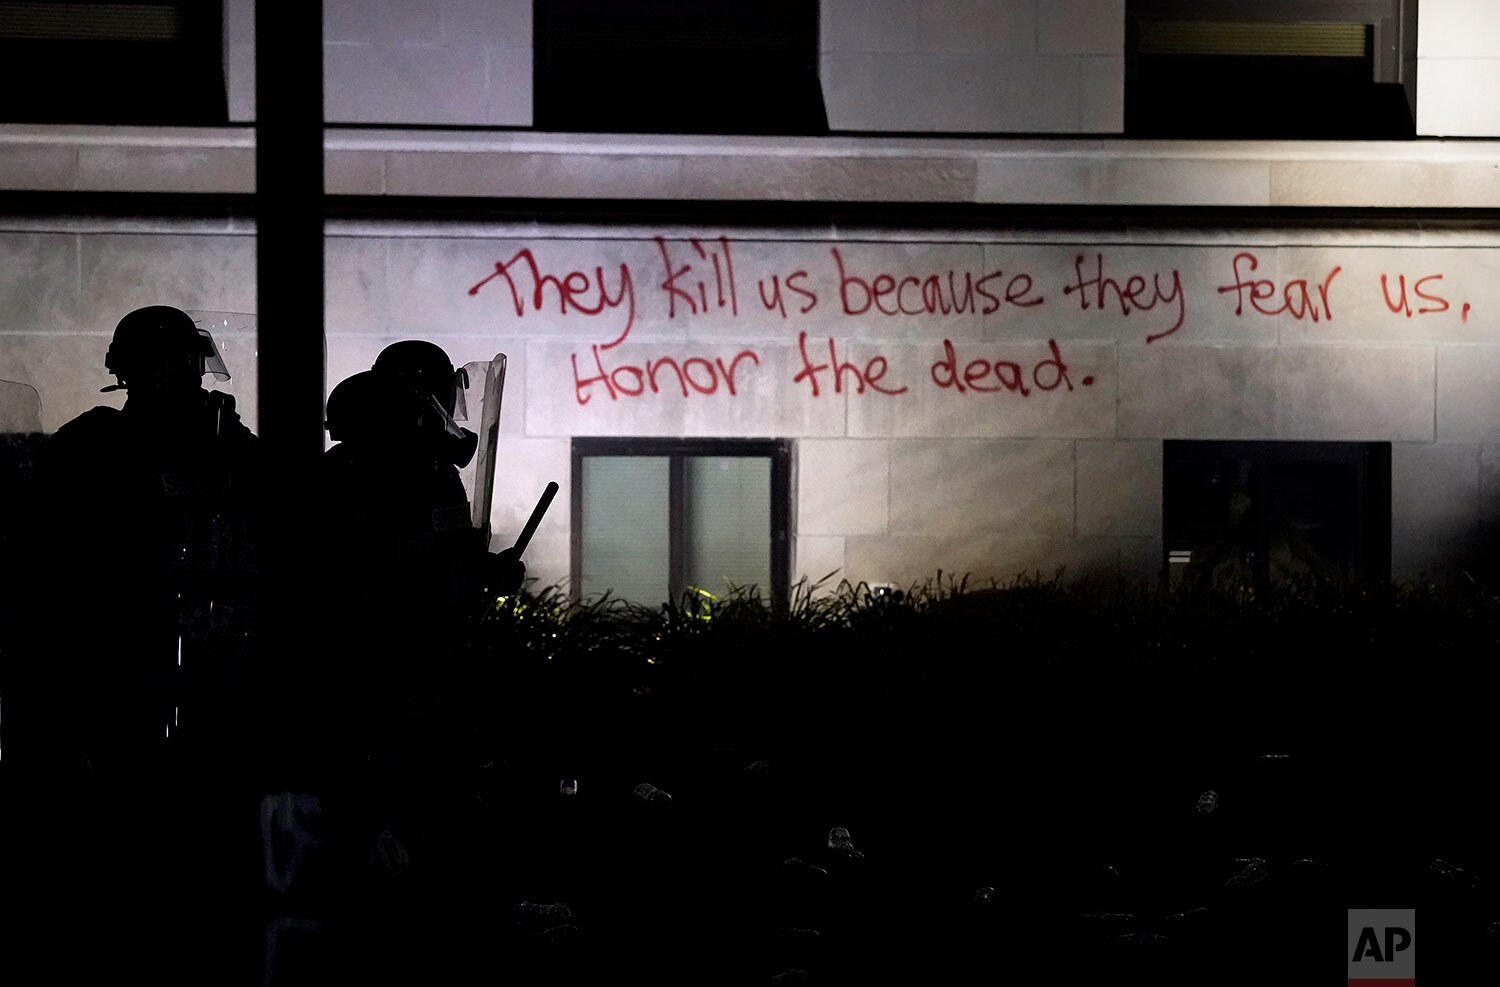  Police in riot gear stand in a line against protesters next to a message spay painted on the Kenosha County Courthouse, late Monday, Aug. 24, 2020, in Kenosha, Wis. (AP Photo/David Goldman) 